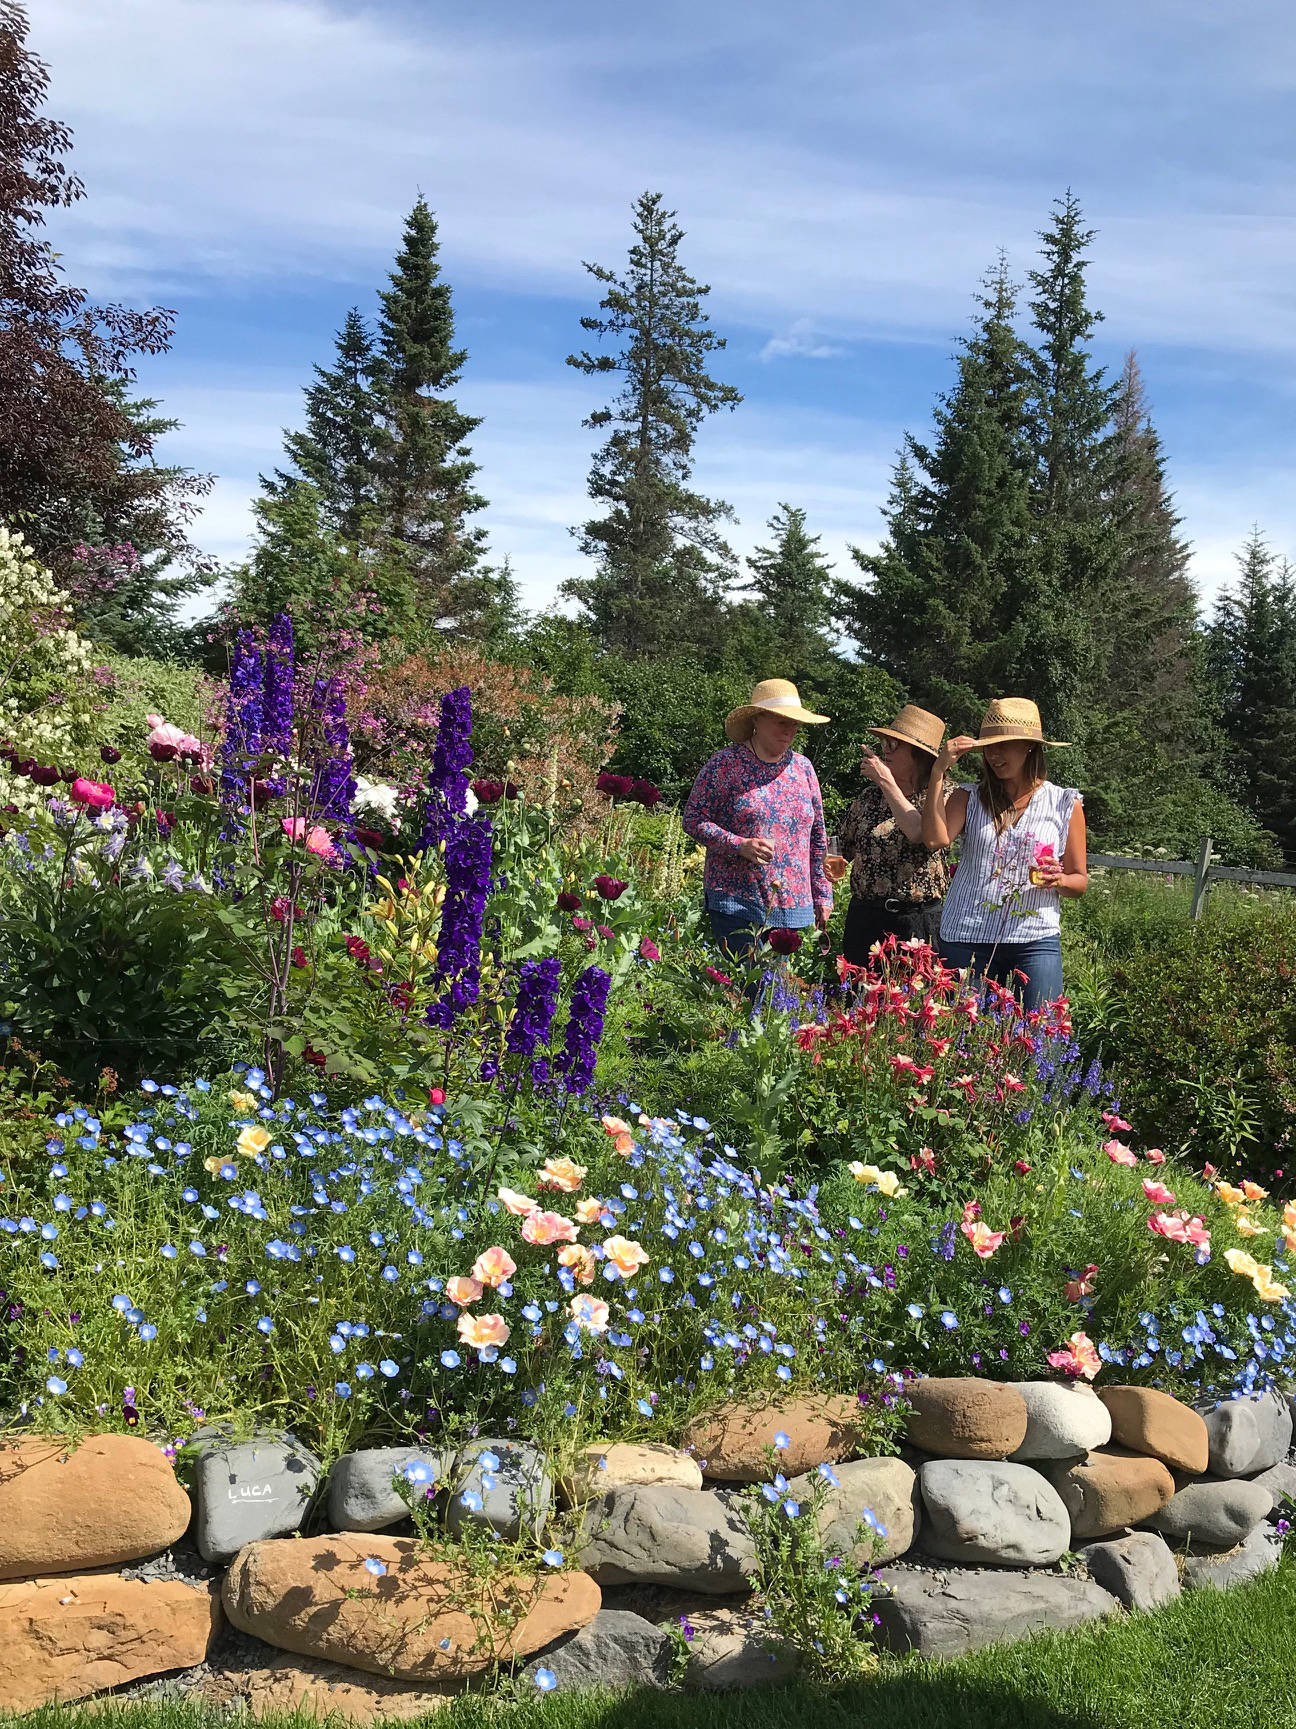 Judy Flora, Marcee Gray and Andrea Fitzpatrick Vallee enjoying a sunny Sunday afternoon on July 29, 2018. Note the Black Knight delphinium making a decent showing in its second year. (Photo by Rosemary Fitzpatrick)